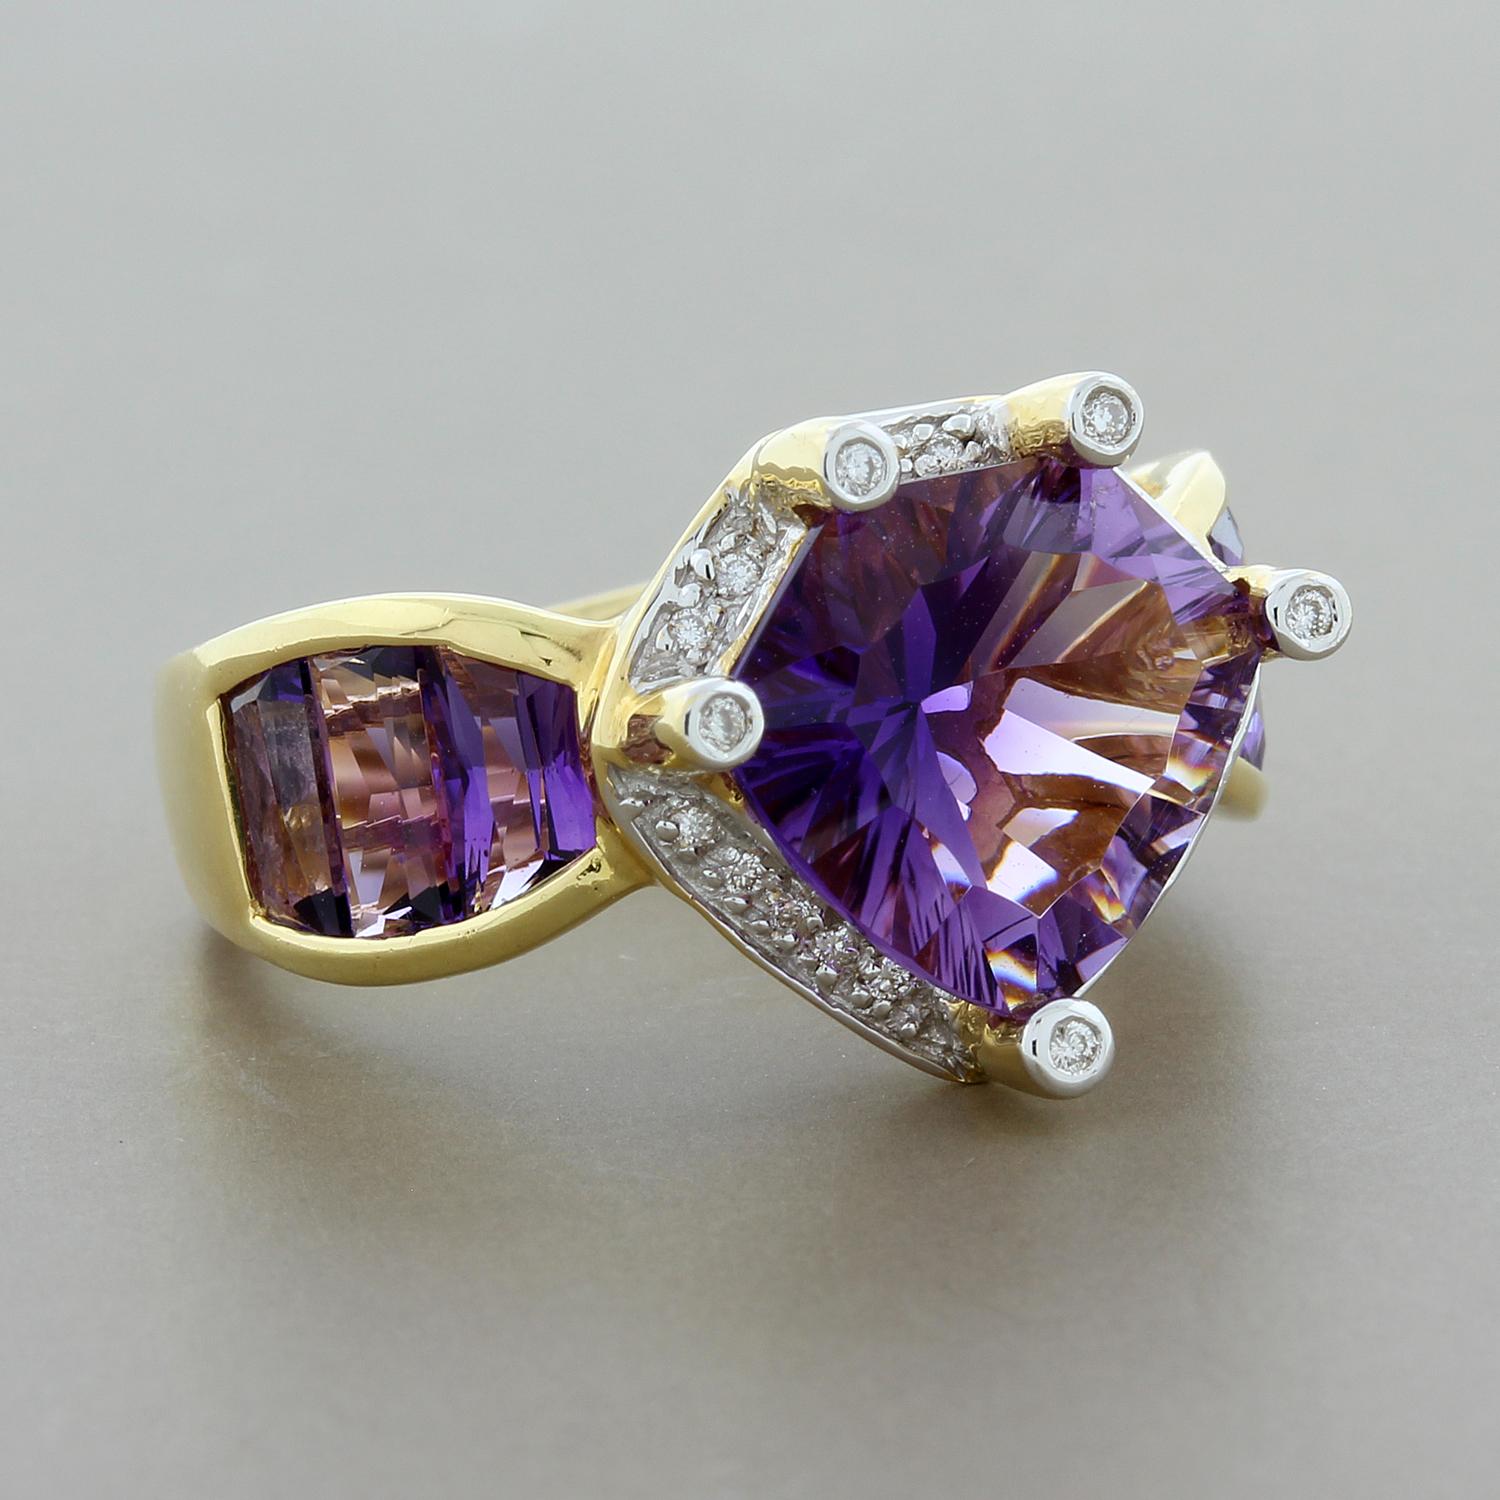 A Bellarri original, this piece features a fantasy cut amethyst center stone haloed by 0.08 carats of round cut diamonds. The shoulders of the ring are set with baguette cut amethyst, which total 5.89 carats including the center stone. Set in 18K